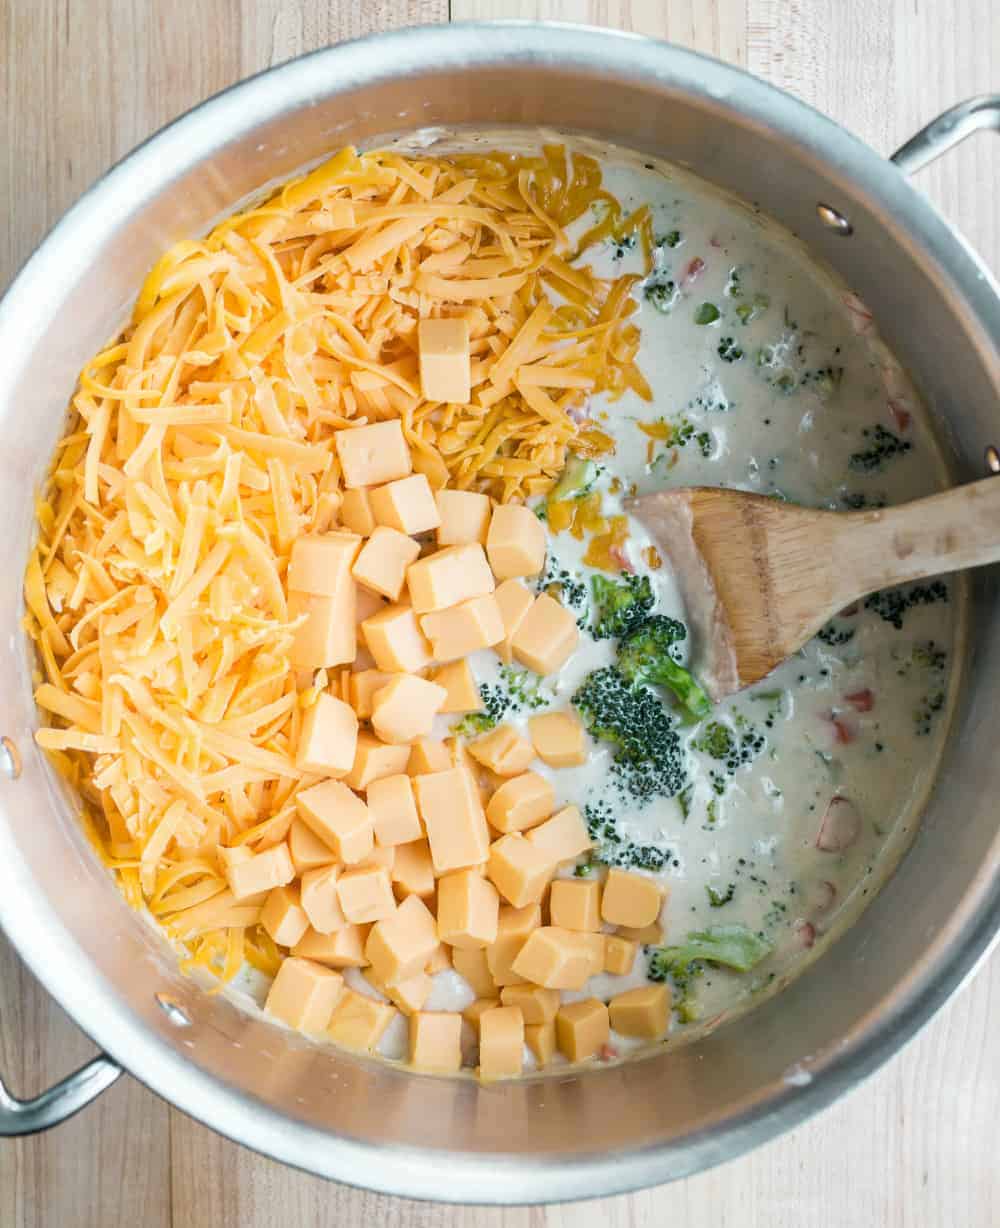 Spoon stirring cheese into a pot of broccoli cheese soup